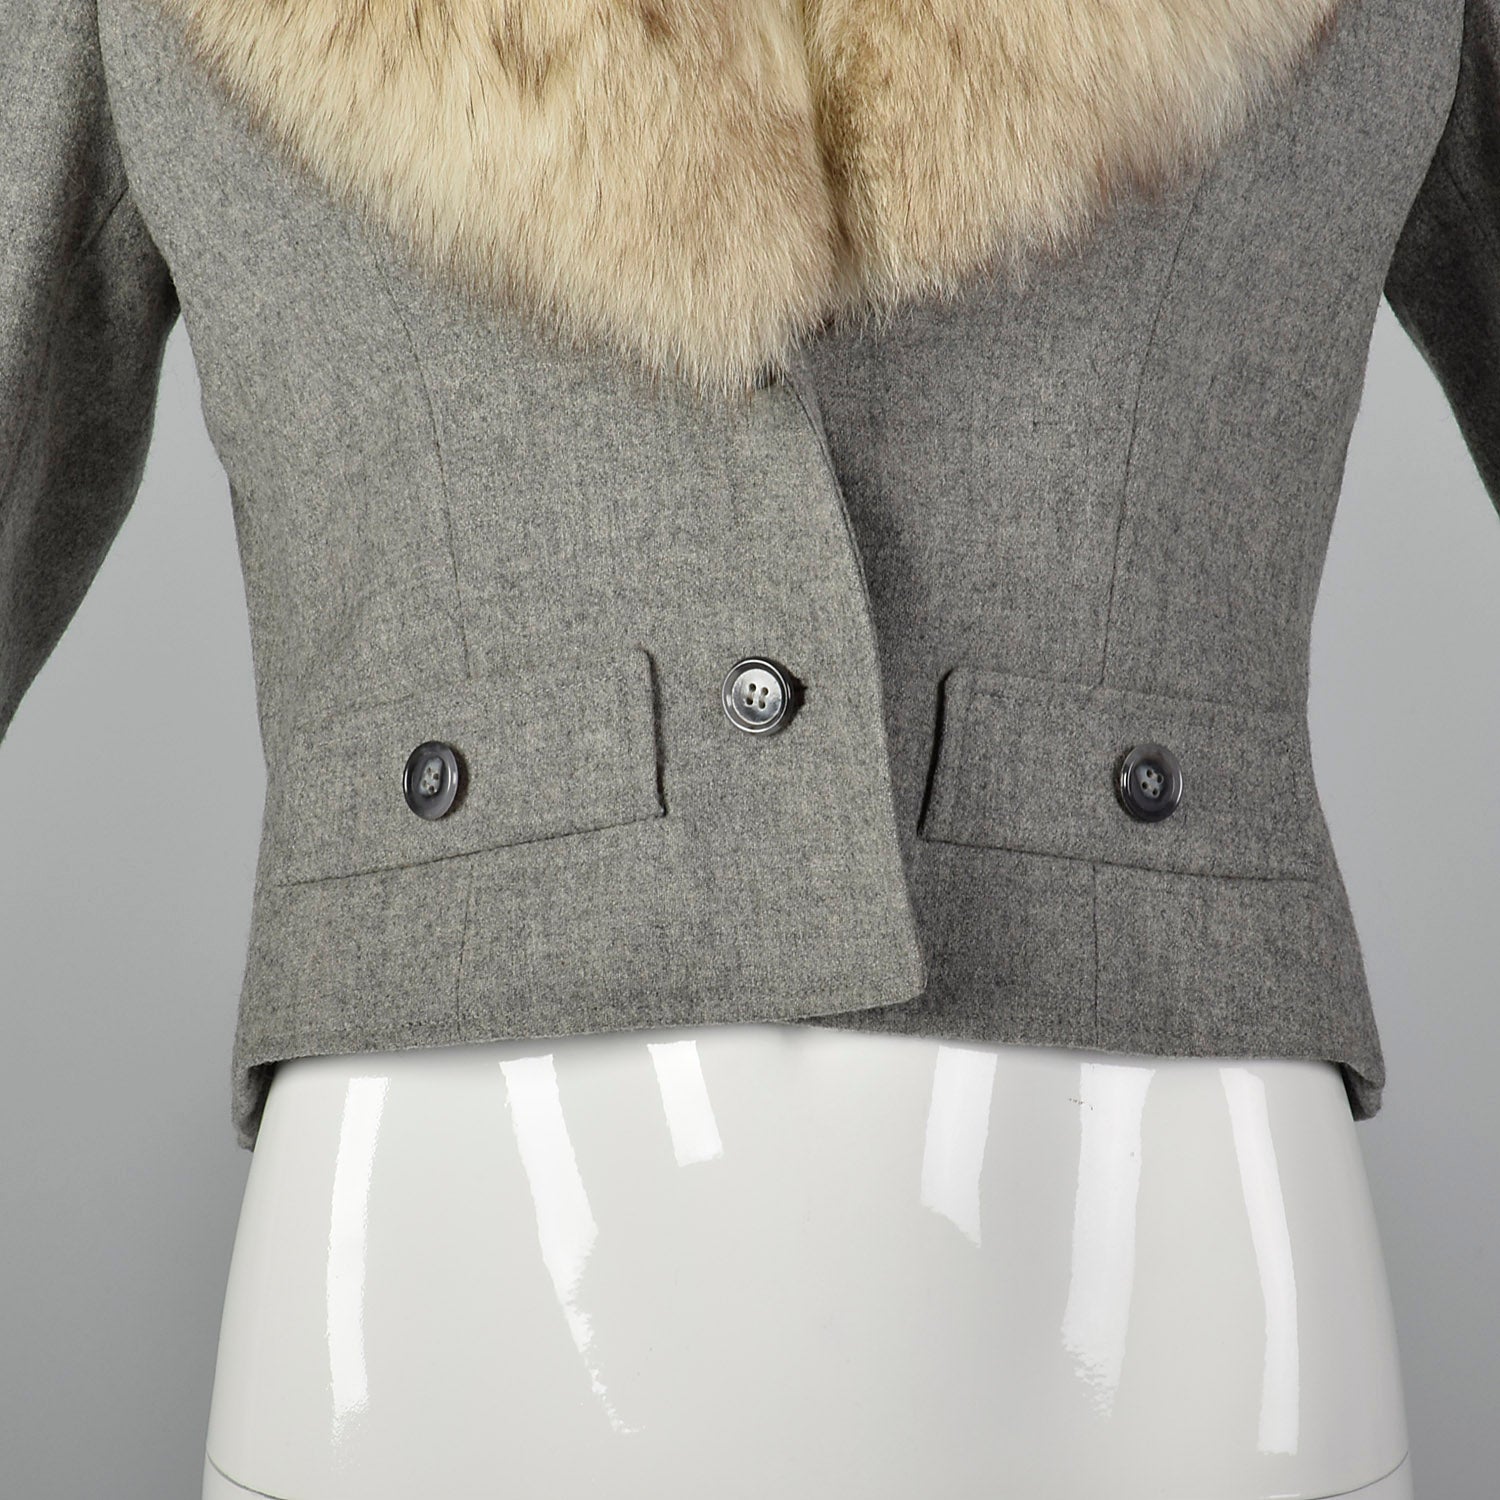 Small 1970s Wool Crop Jacket with Fur Collar